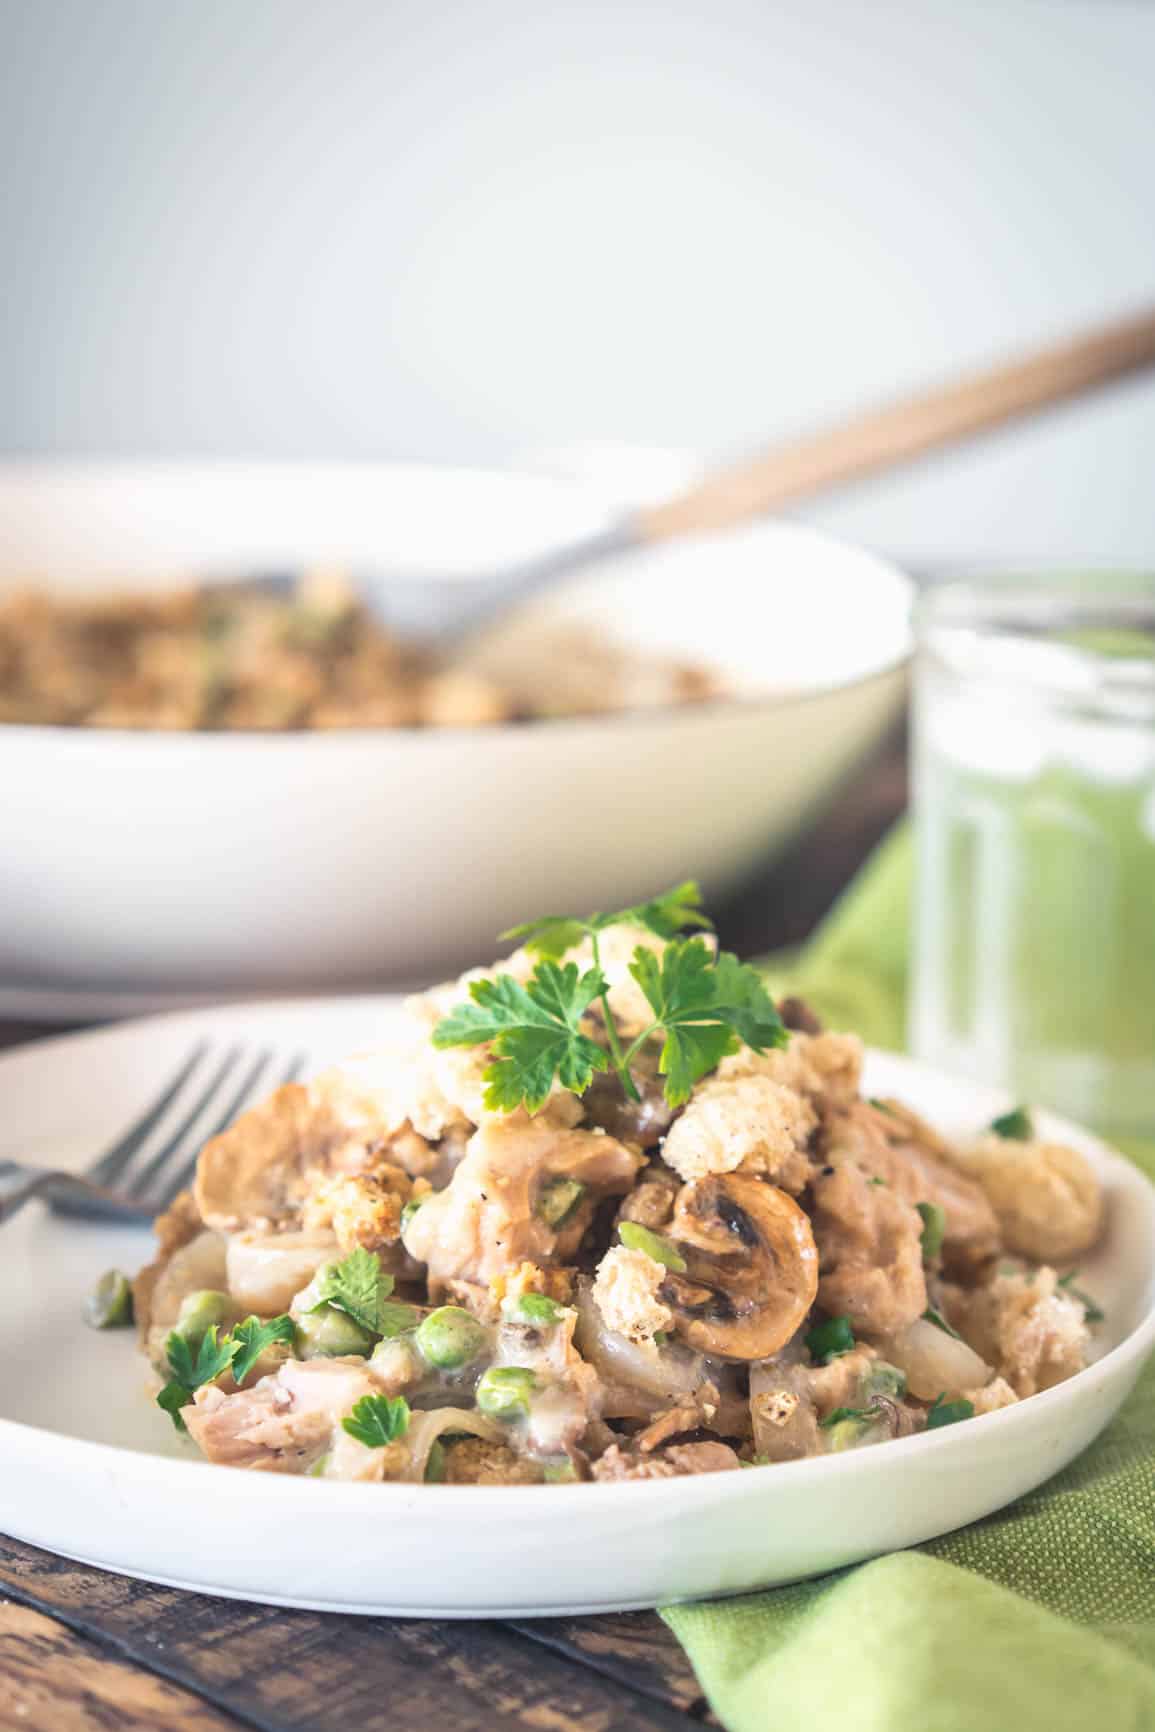 Keto Dairy-Free Tuna Noodle Casserole from your Pantry {Paleo}